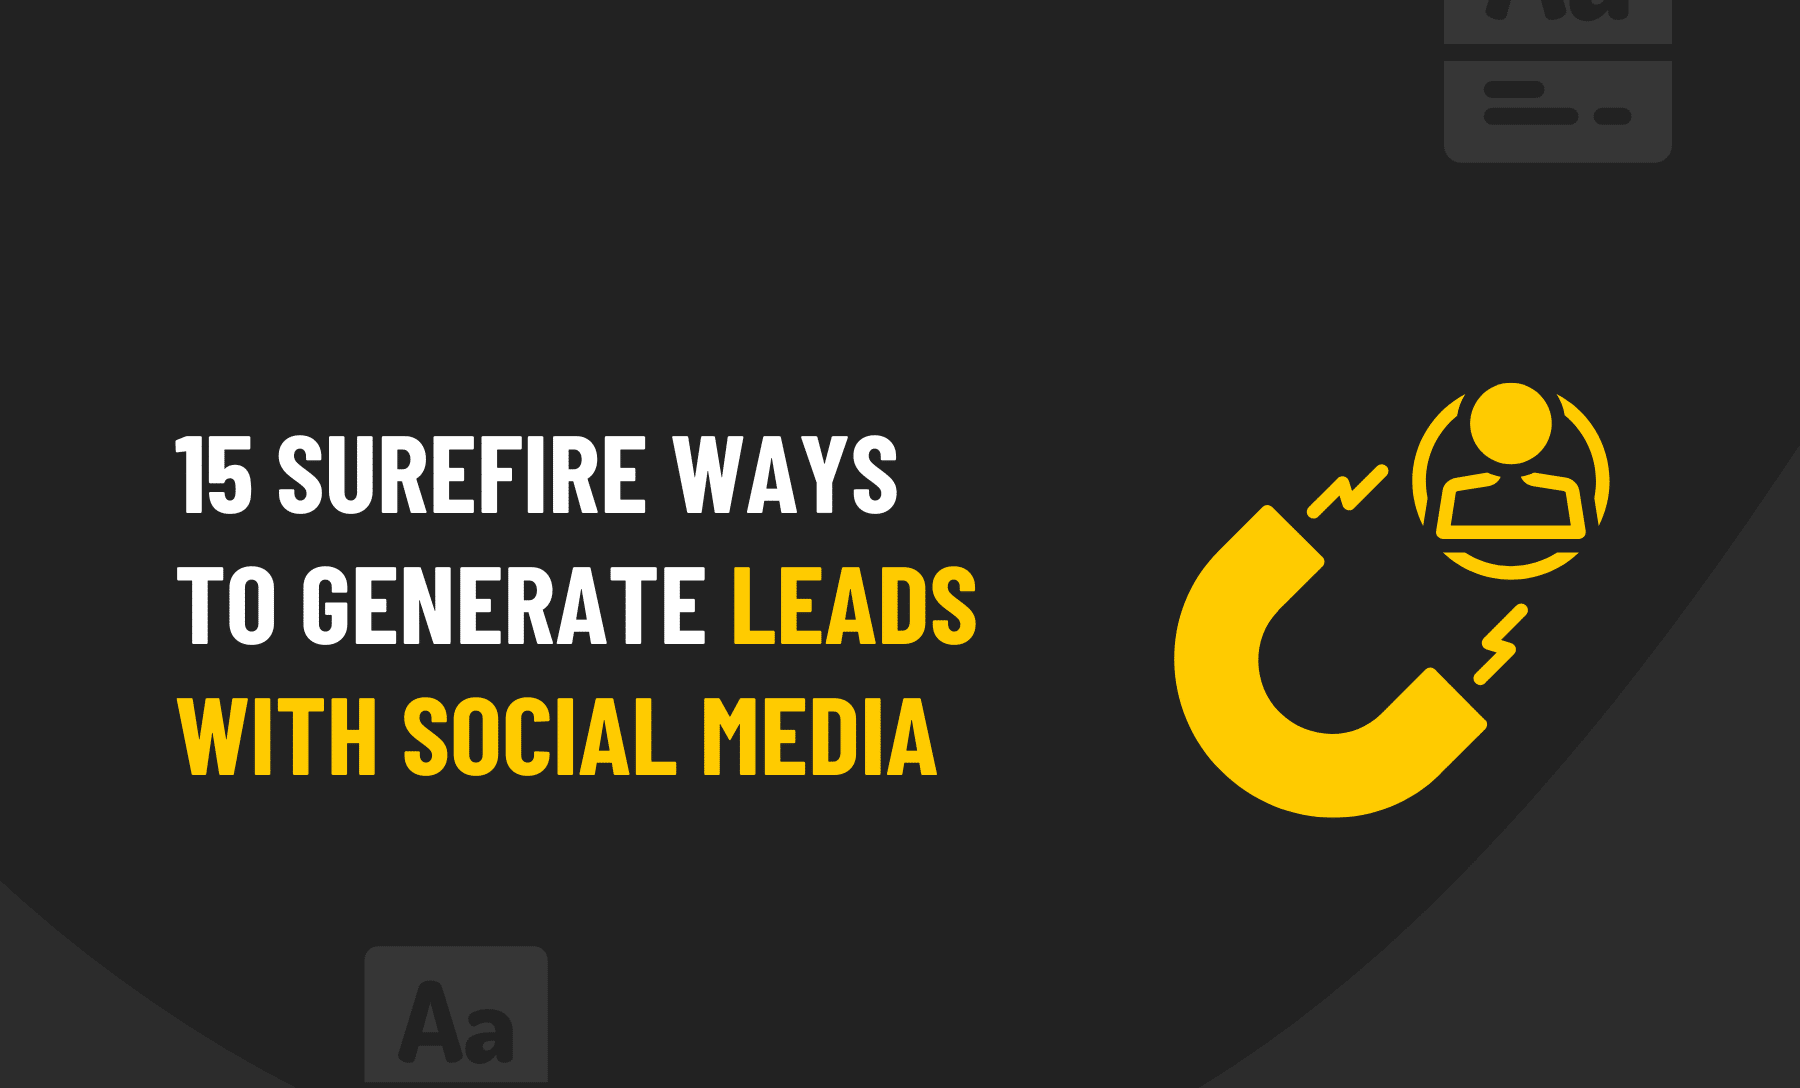 15 surefire ways to generate leads with social media